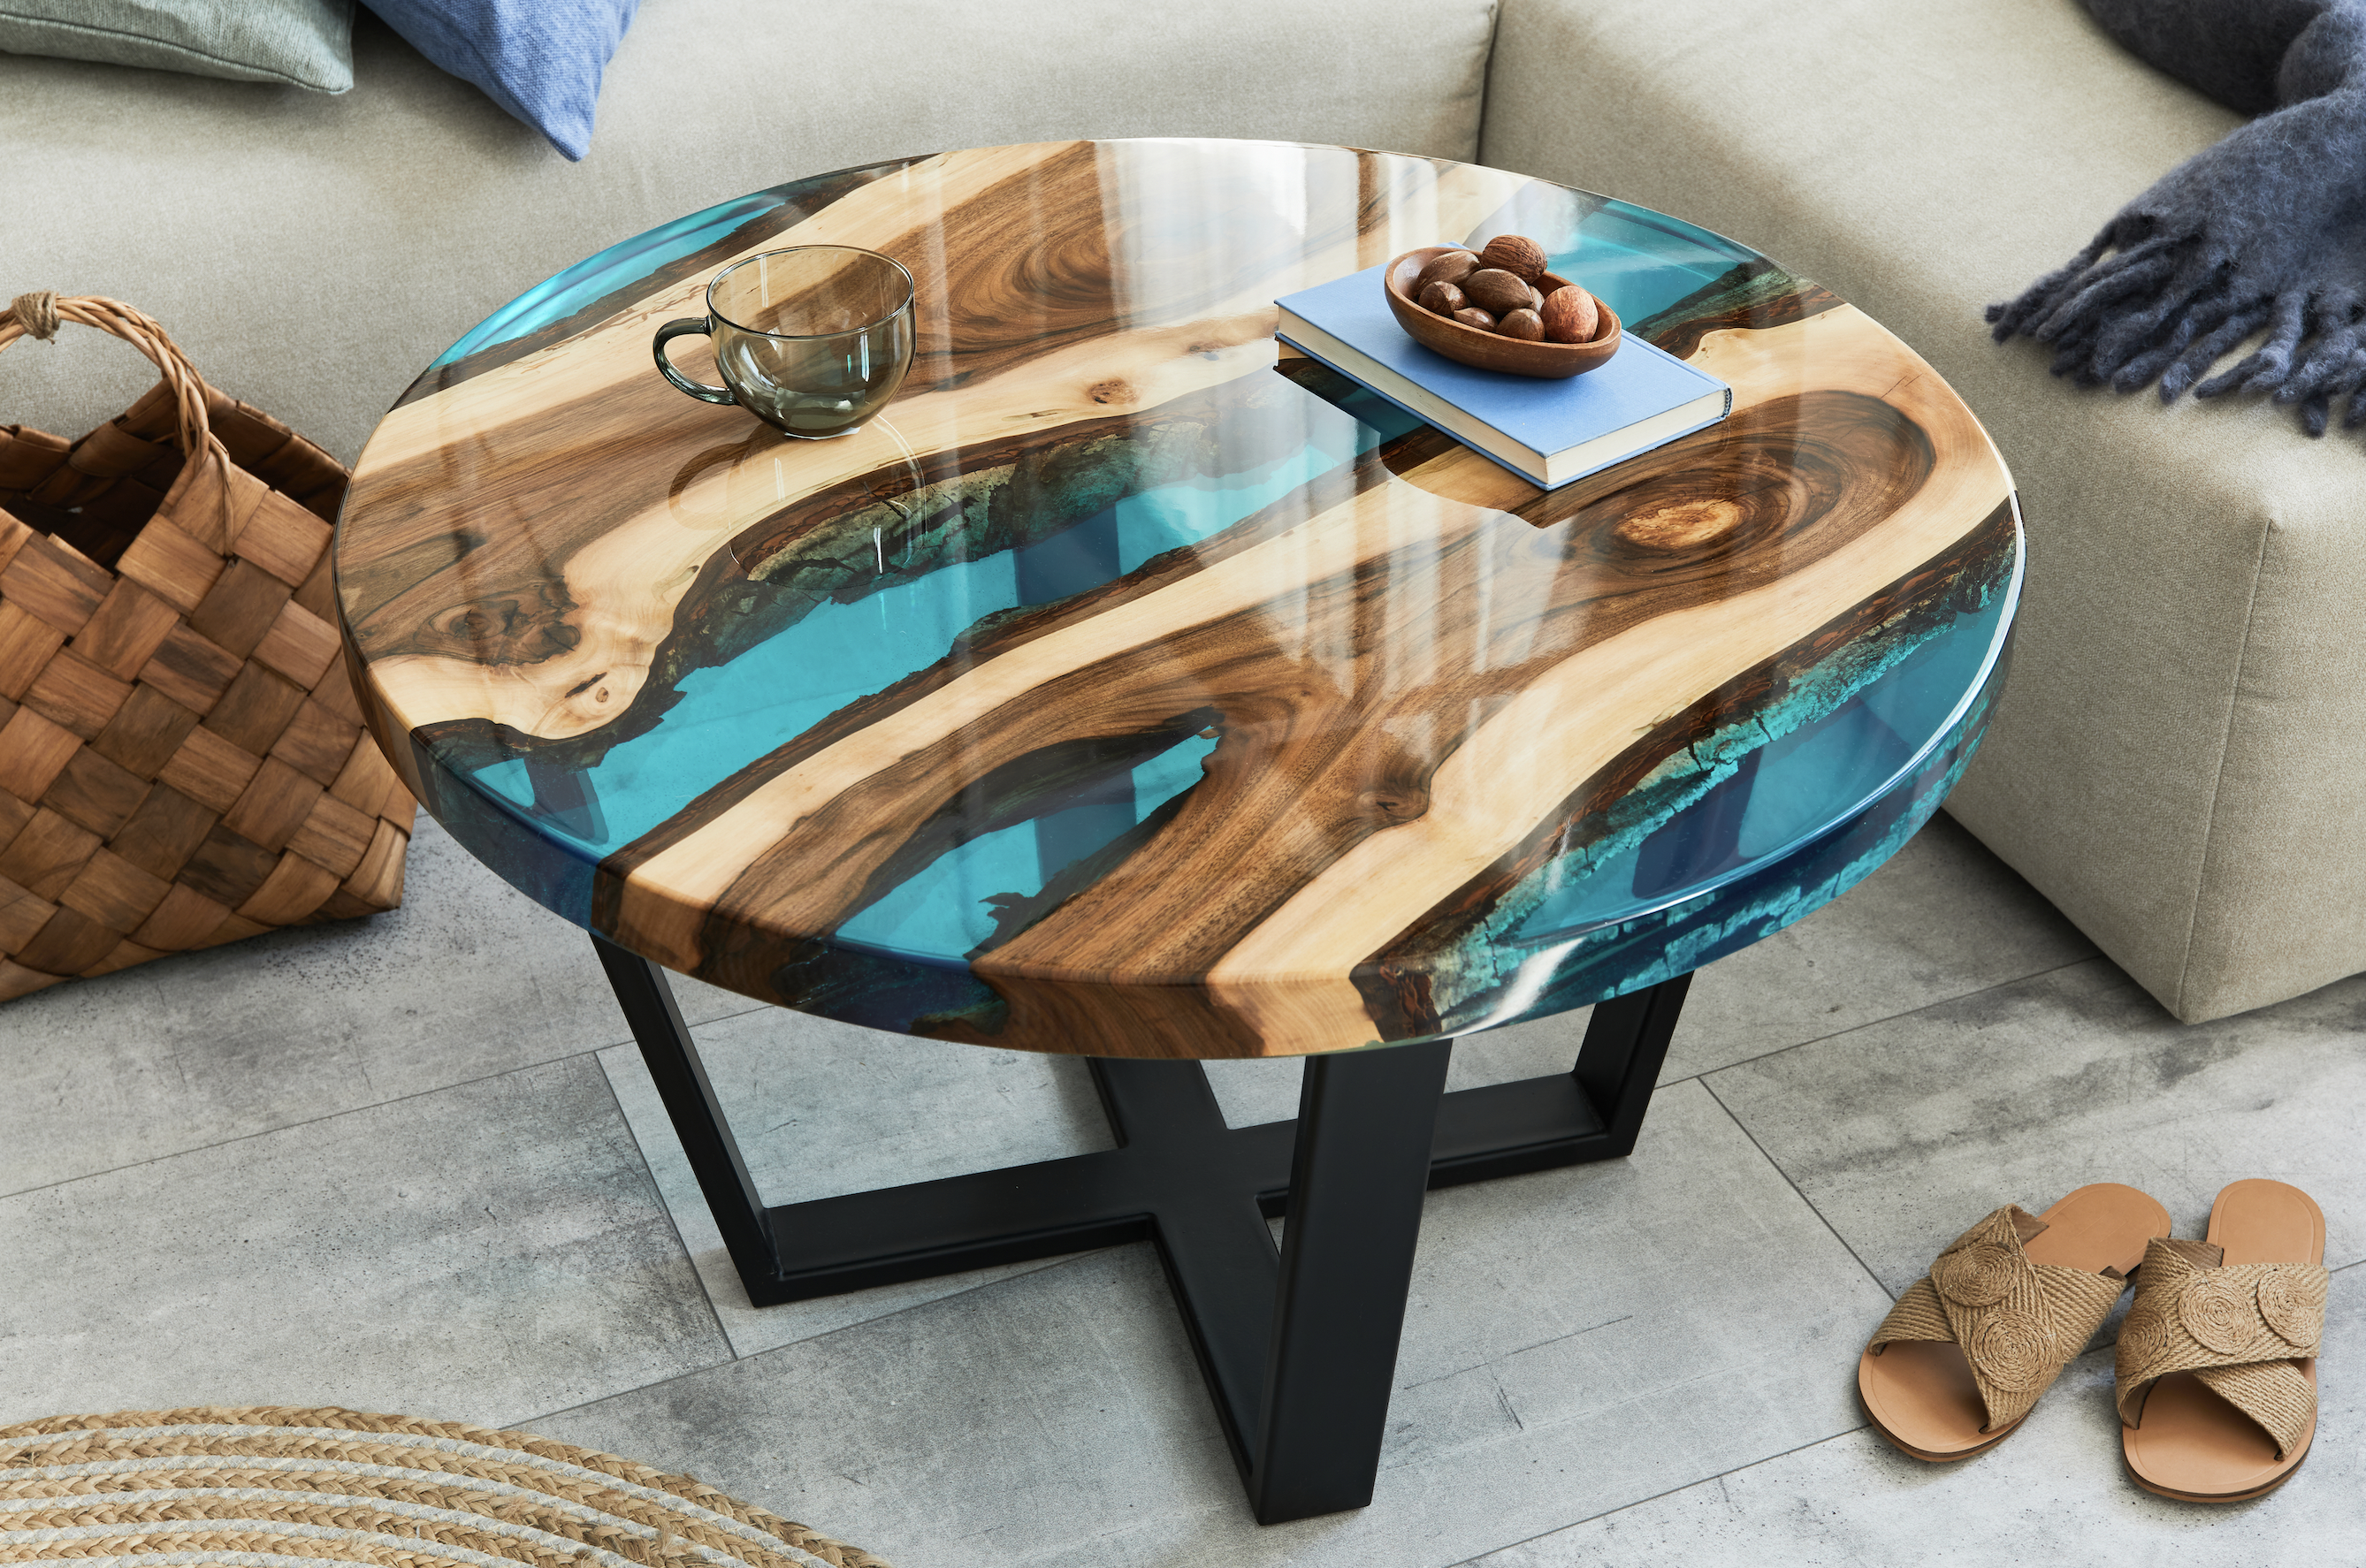 buy locally hand made epoxy tables with live edge wood slabs and custom made in fraser valley british columbia canada from chilliwack epoxy tables